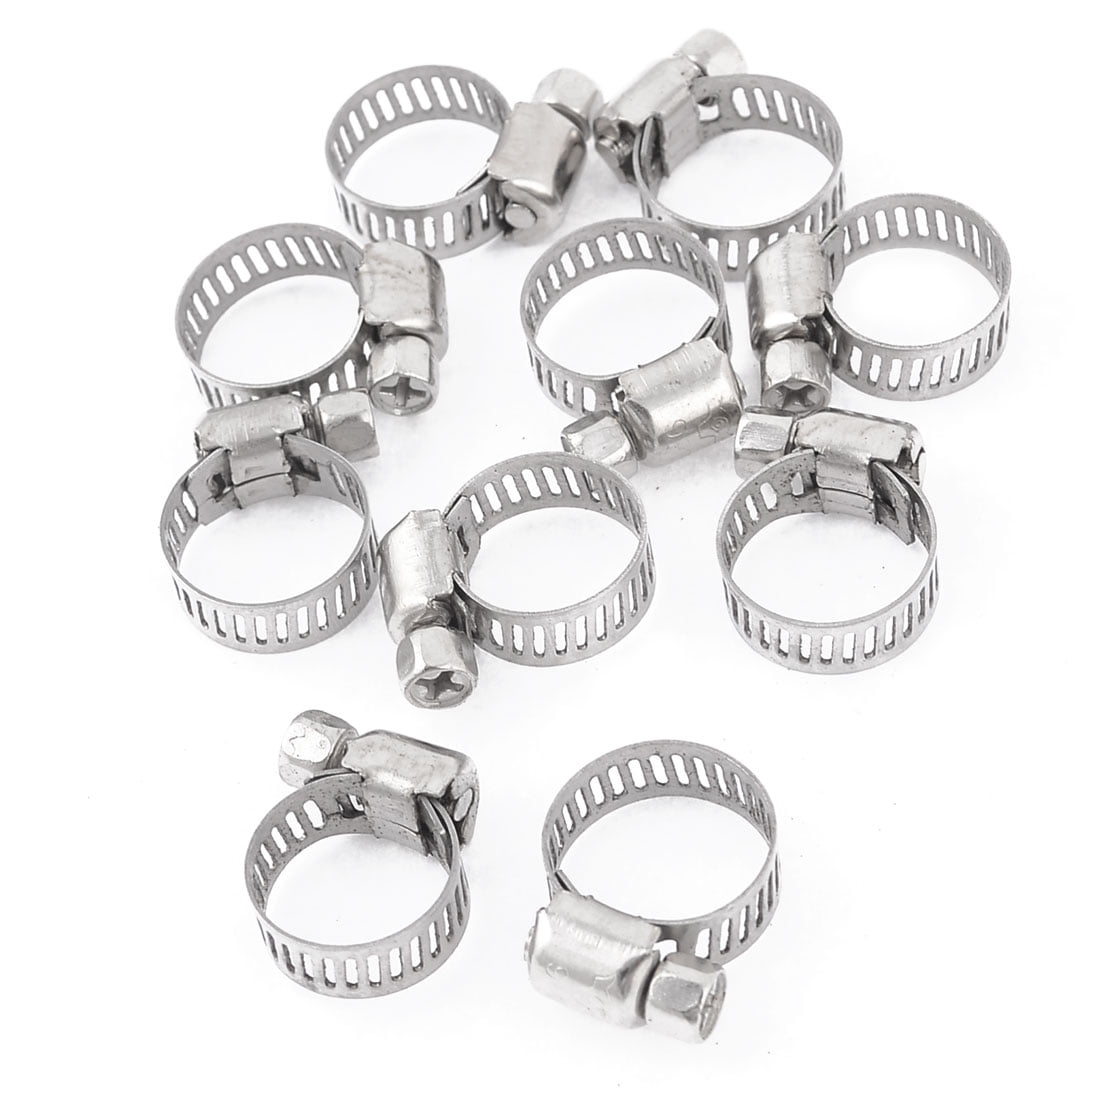 20 x Adjustable 9mm-16mm Stainless Steel Worm Gear Hose Clamps Pipe 